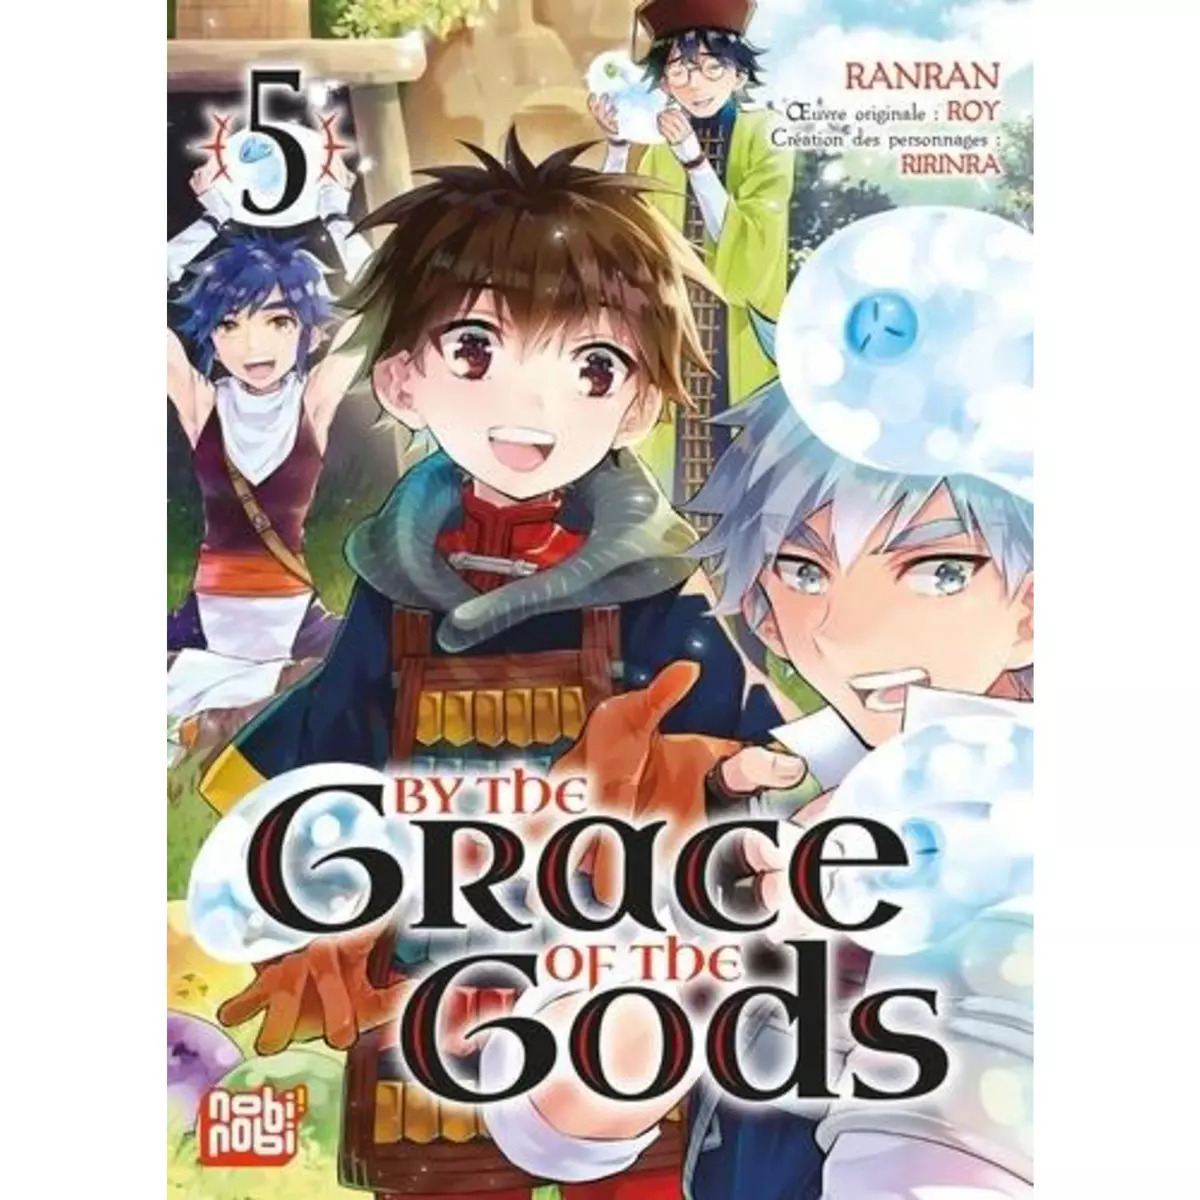  BY THE GRACE OF THE GODS TOME 5 , Ranran